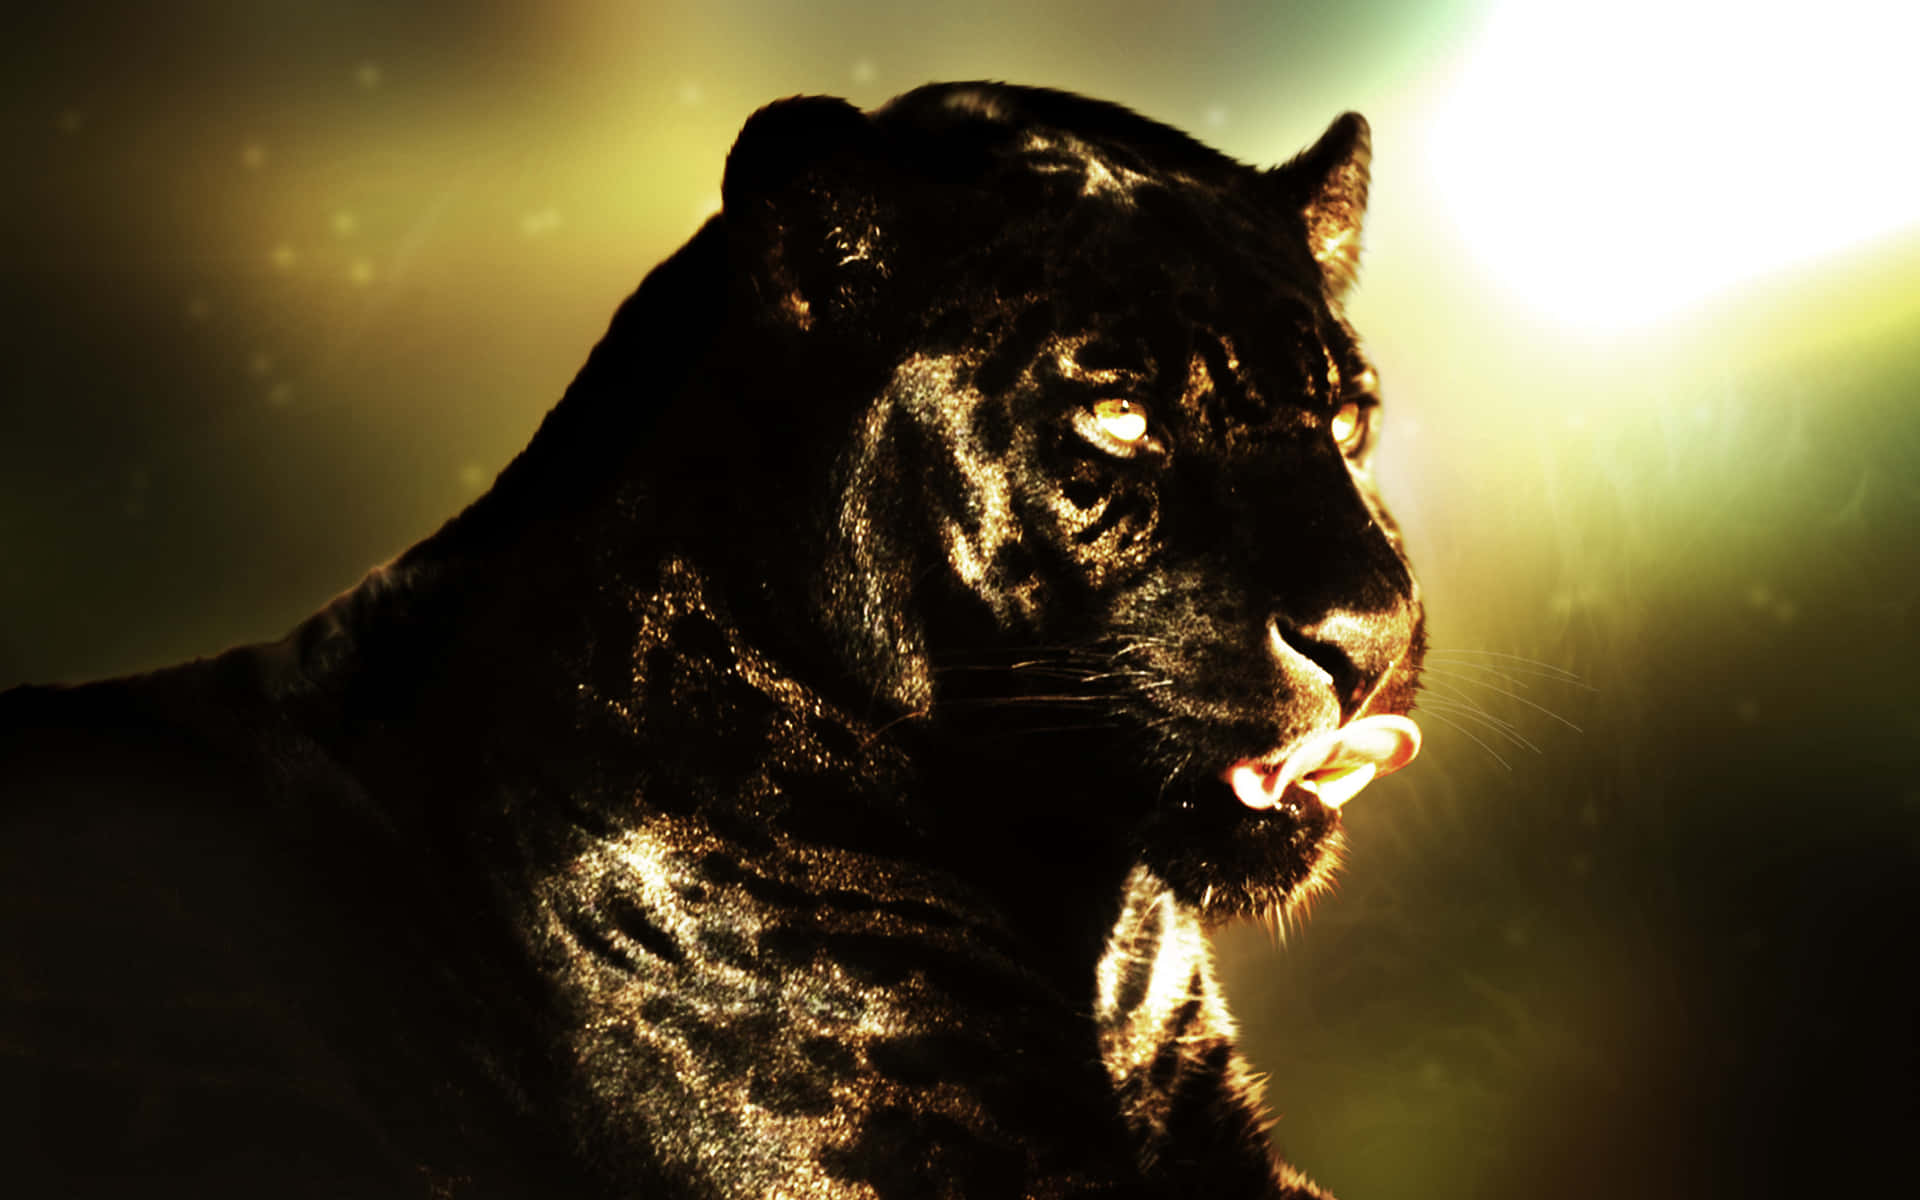 An Unbelievable Sight - A Cool Black Panther Animal Wallpaper